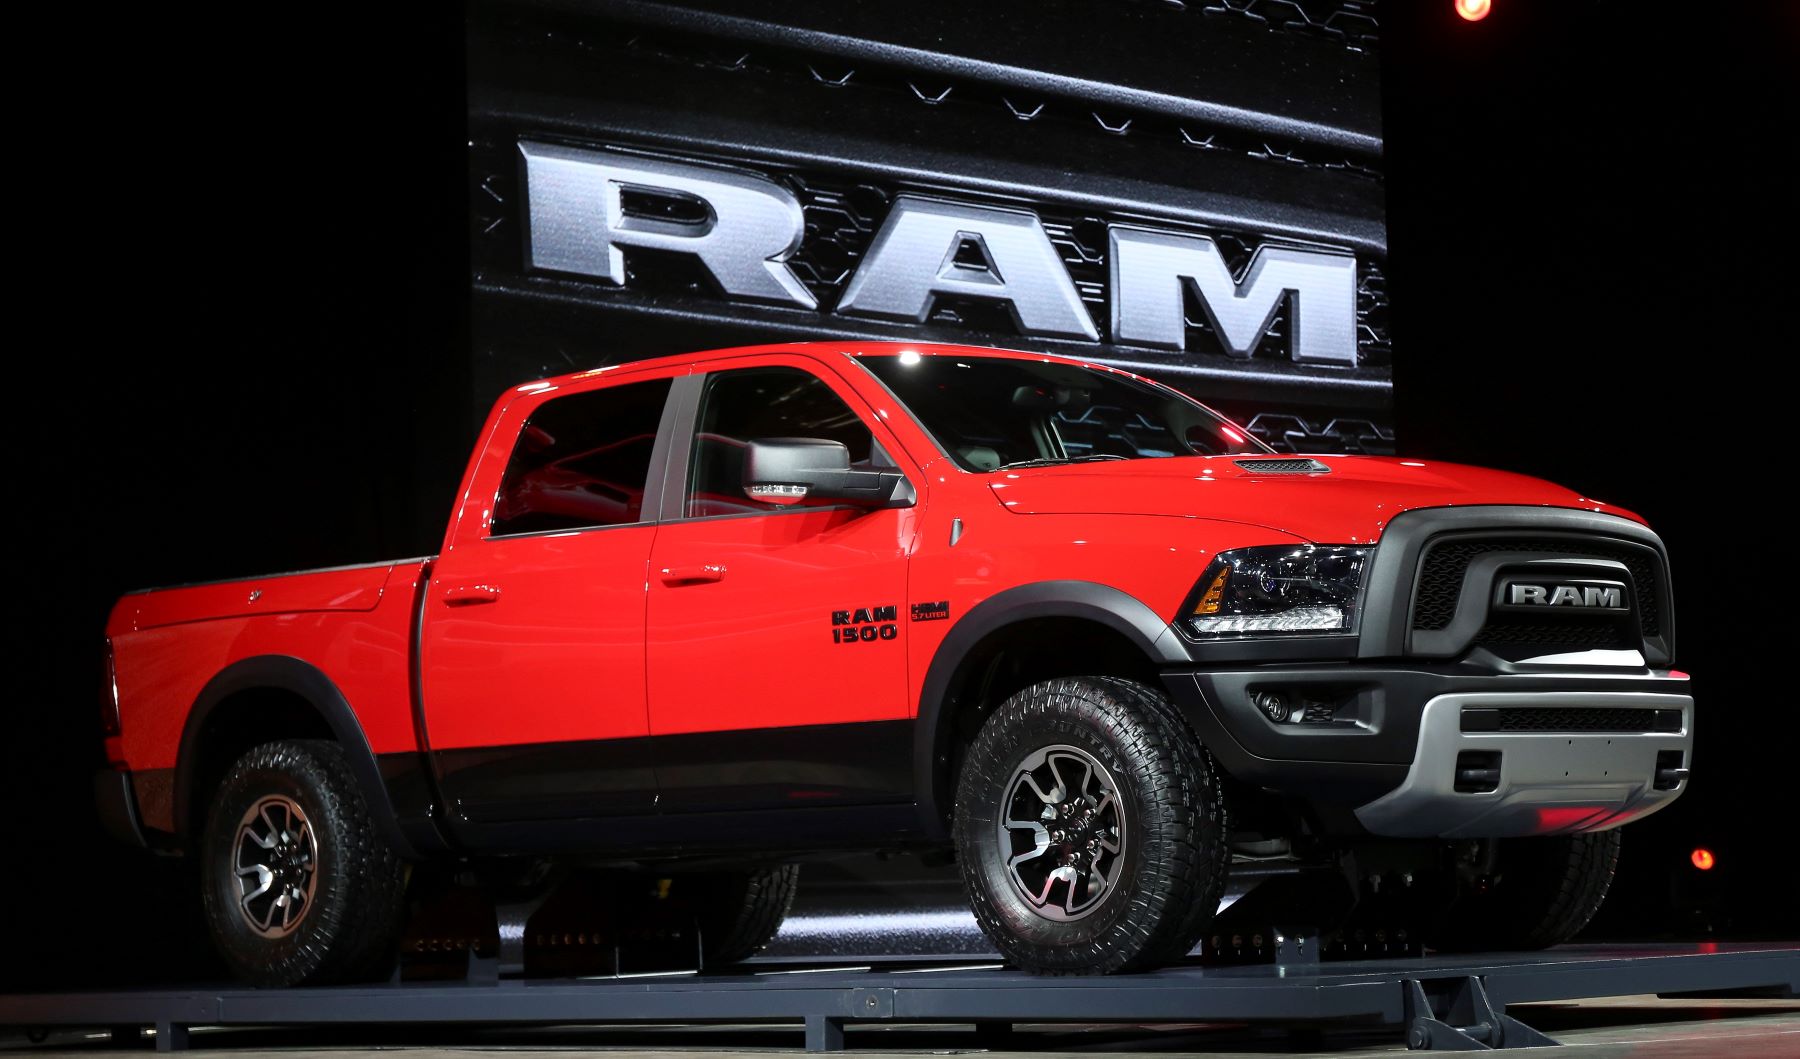 The new Ram 1500 Rebel debut at the 2015 North American International Auto Show in Detroit, Michigan